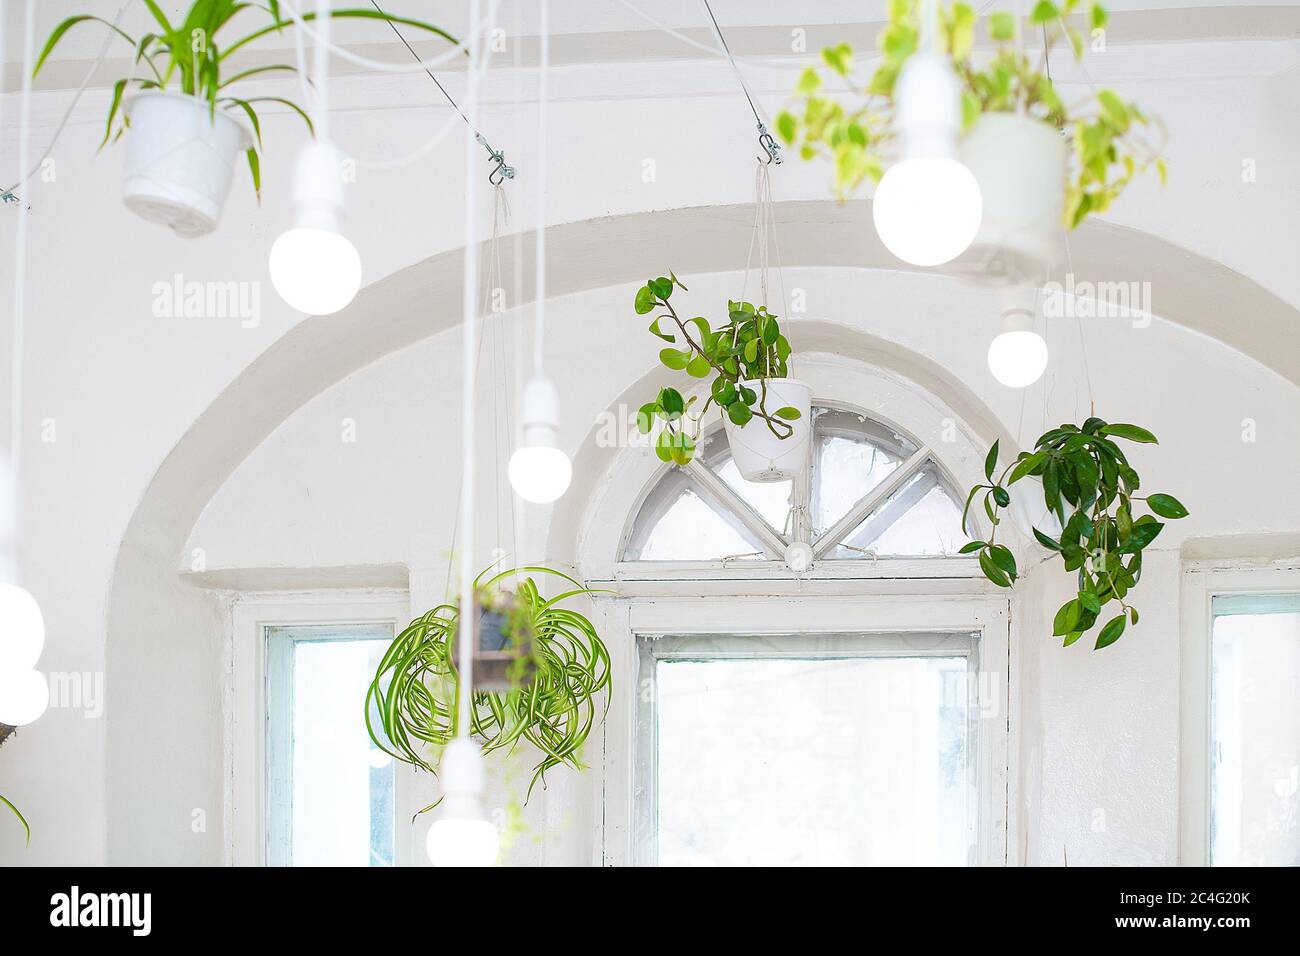 Mini florarium with green plants hanging on a wire with white lights in a bright interior. The living garden. Phytodesign. Stock Photo